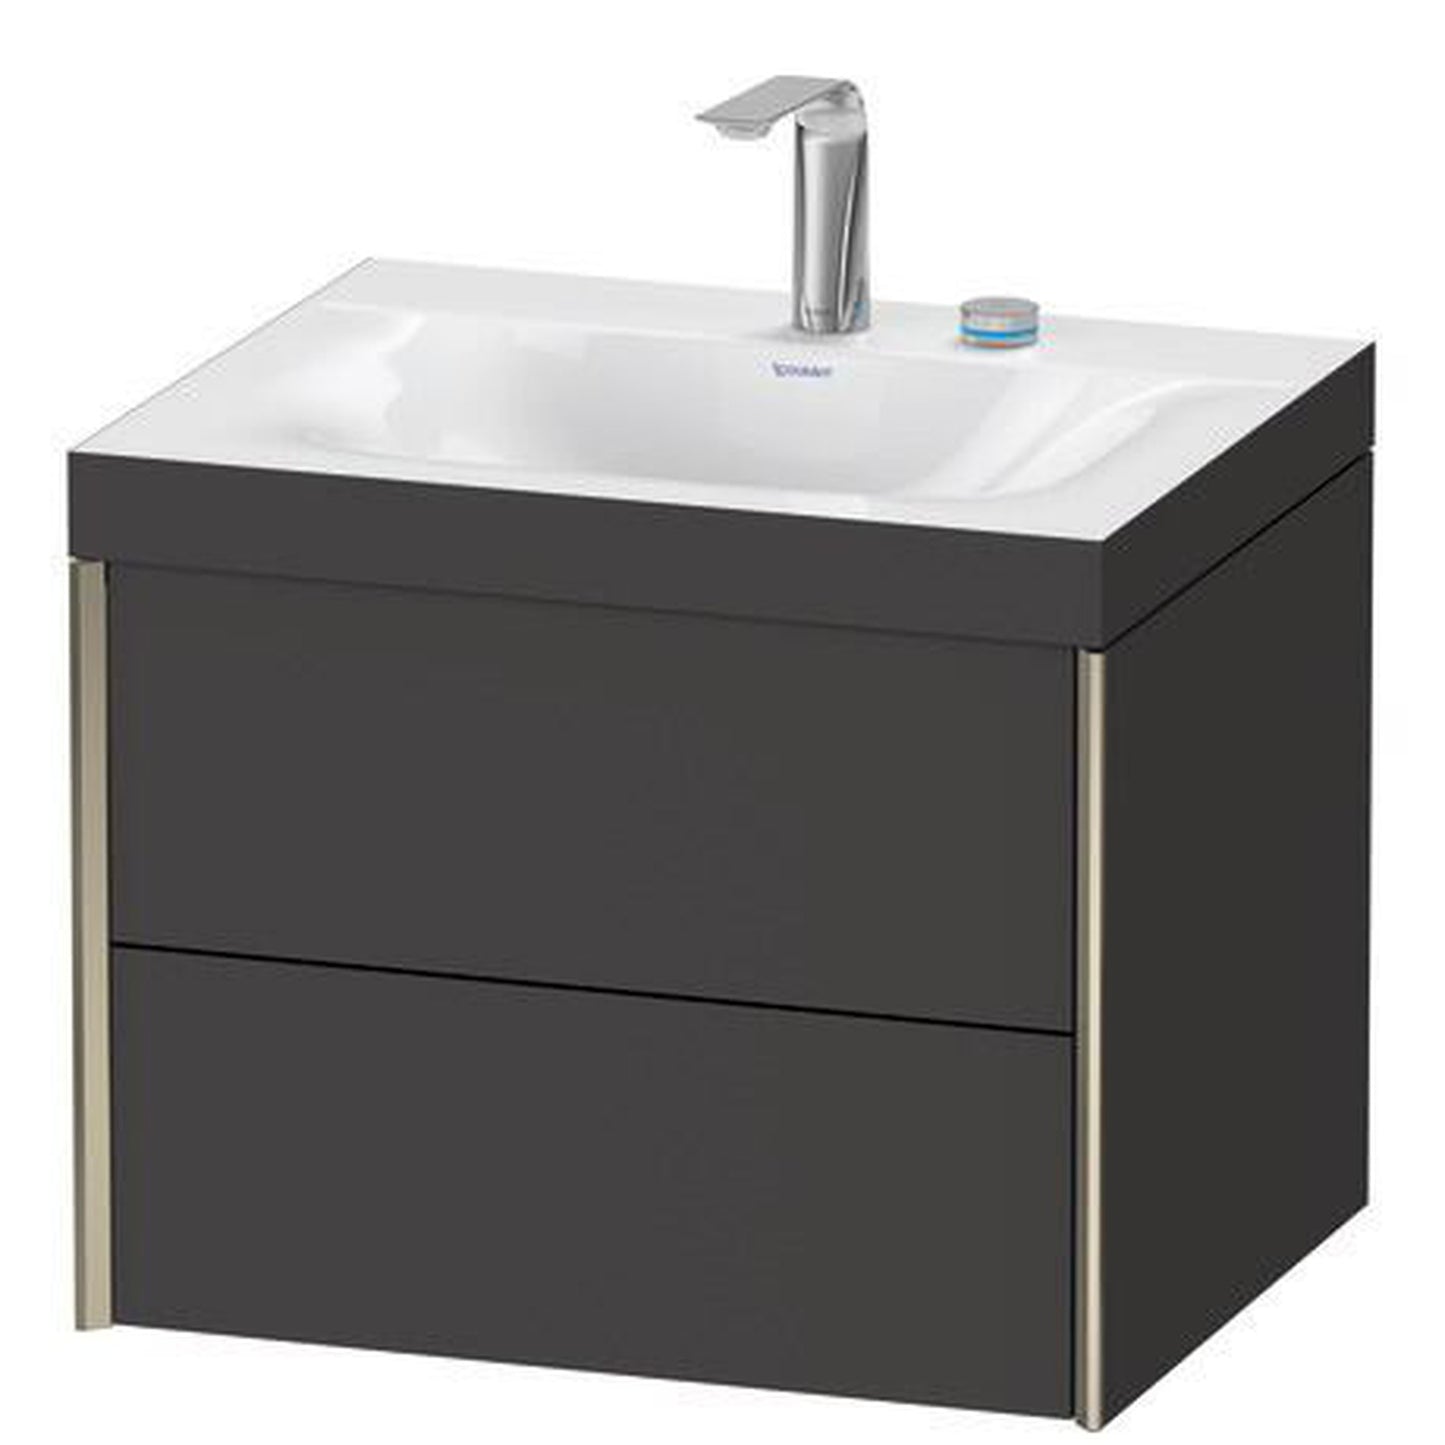 Duravit Xviu 24" x 20" x 19" Two Drawer C-Bonded Wall-Mount Vanity Kit With Two Tap Holes, Graphite (XV4614EB180C)